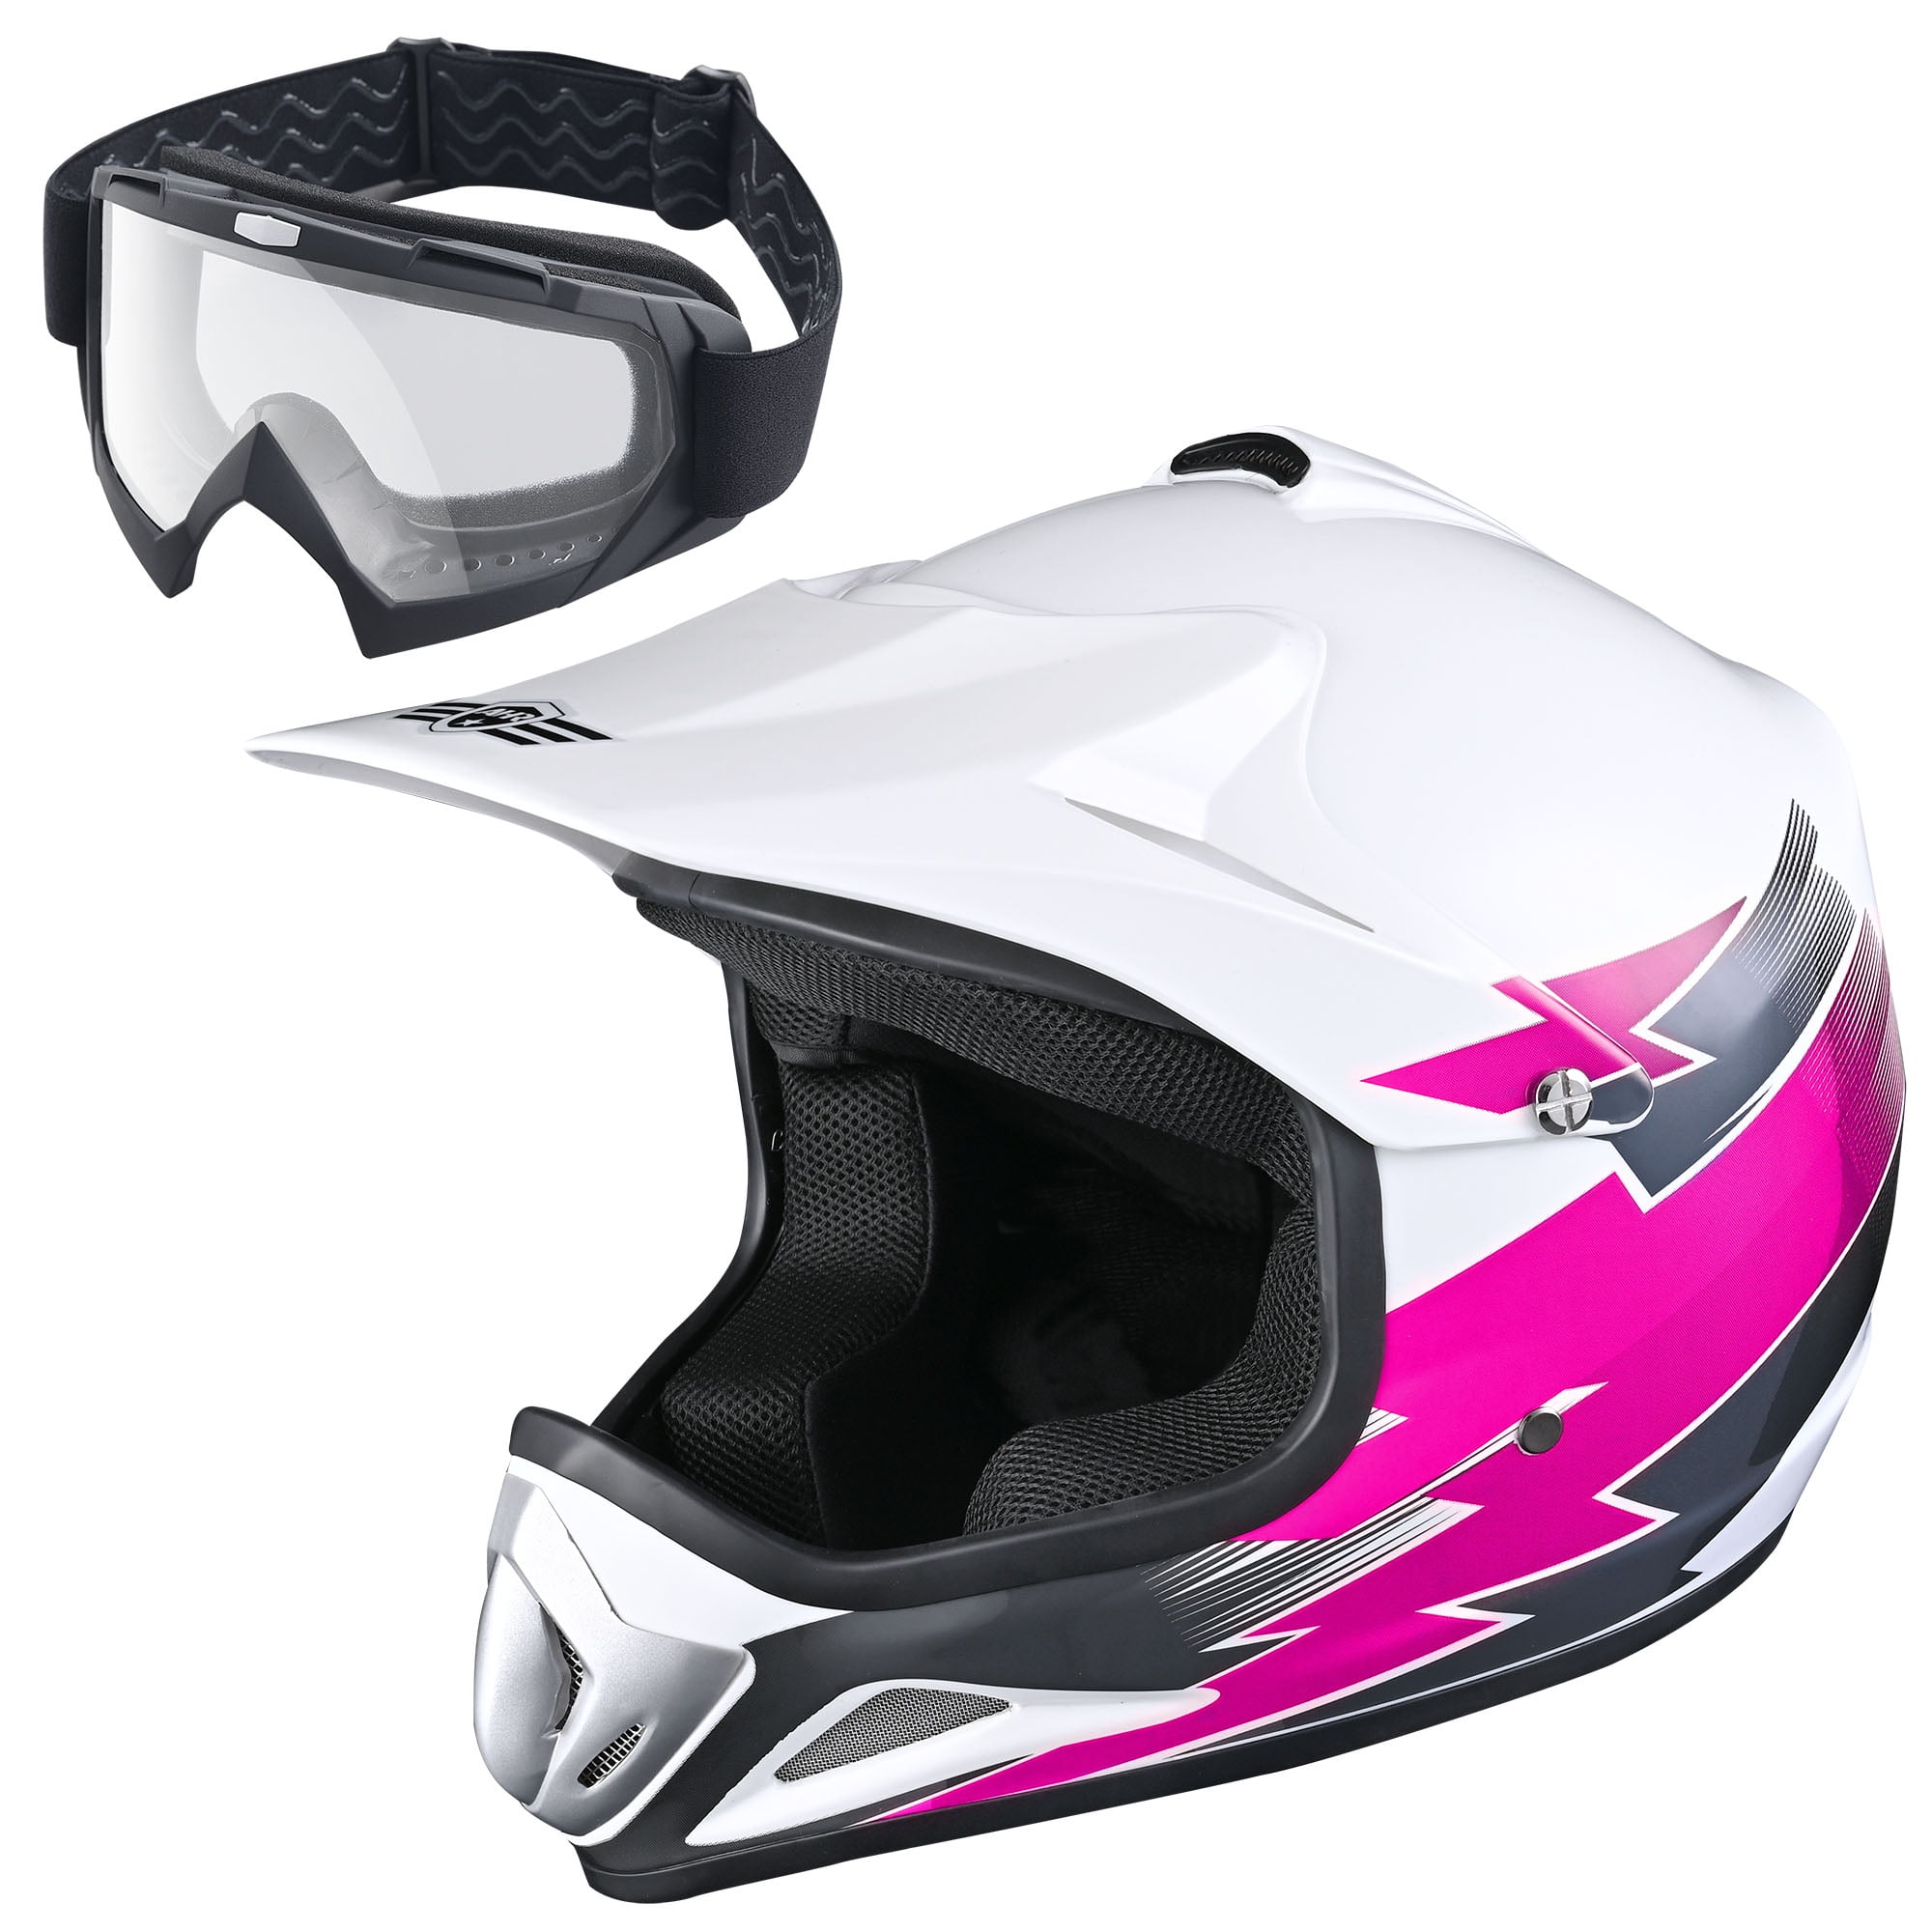 Motorcycle Motorcross Outdoor Sports UVA Goggles with Colorful Graffiti Frame 